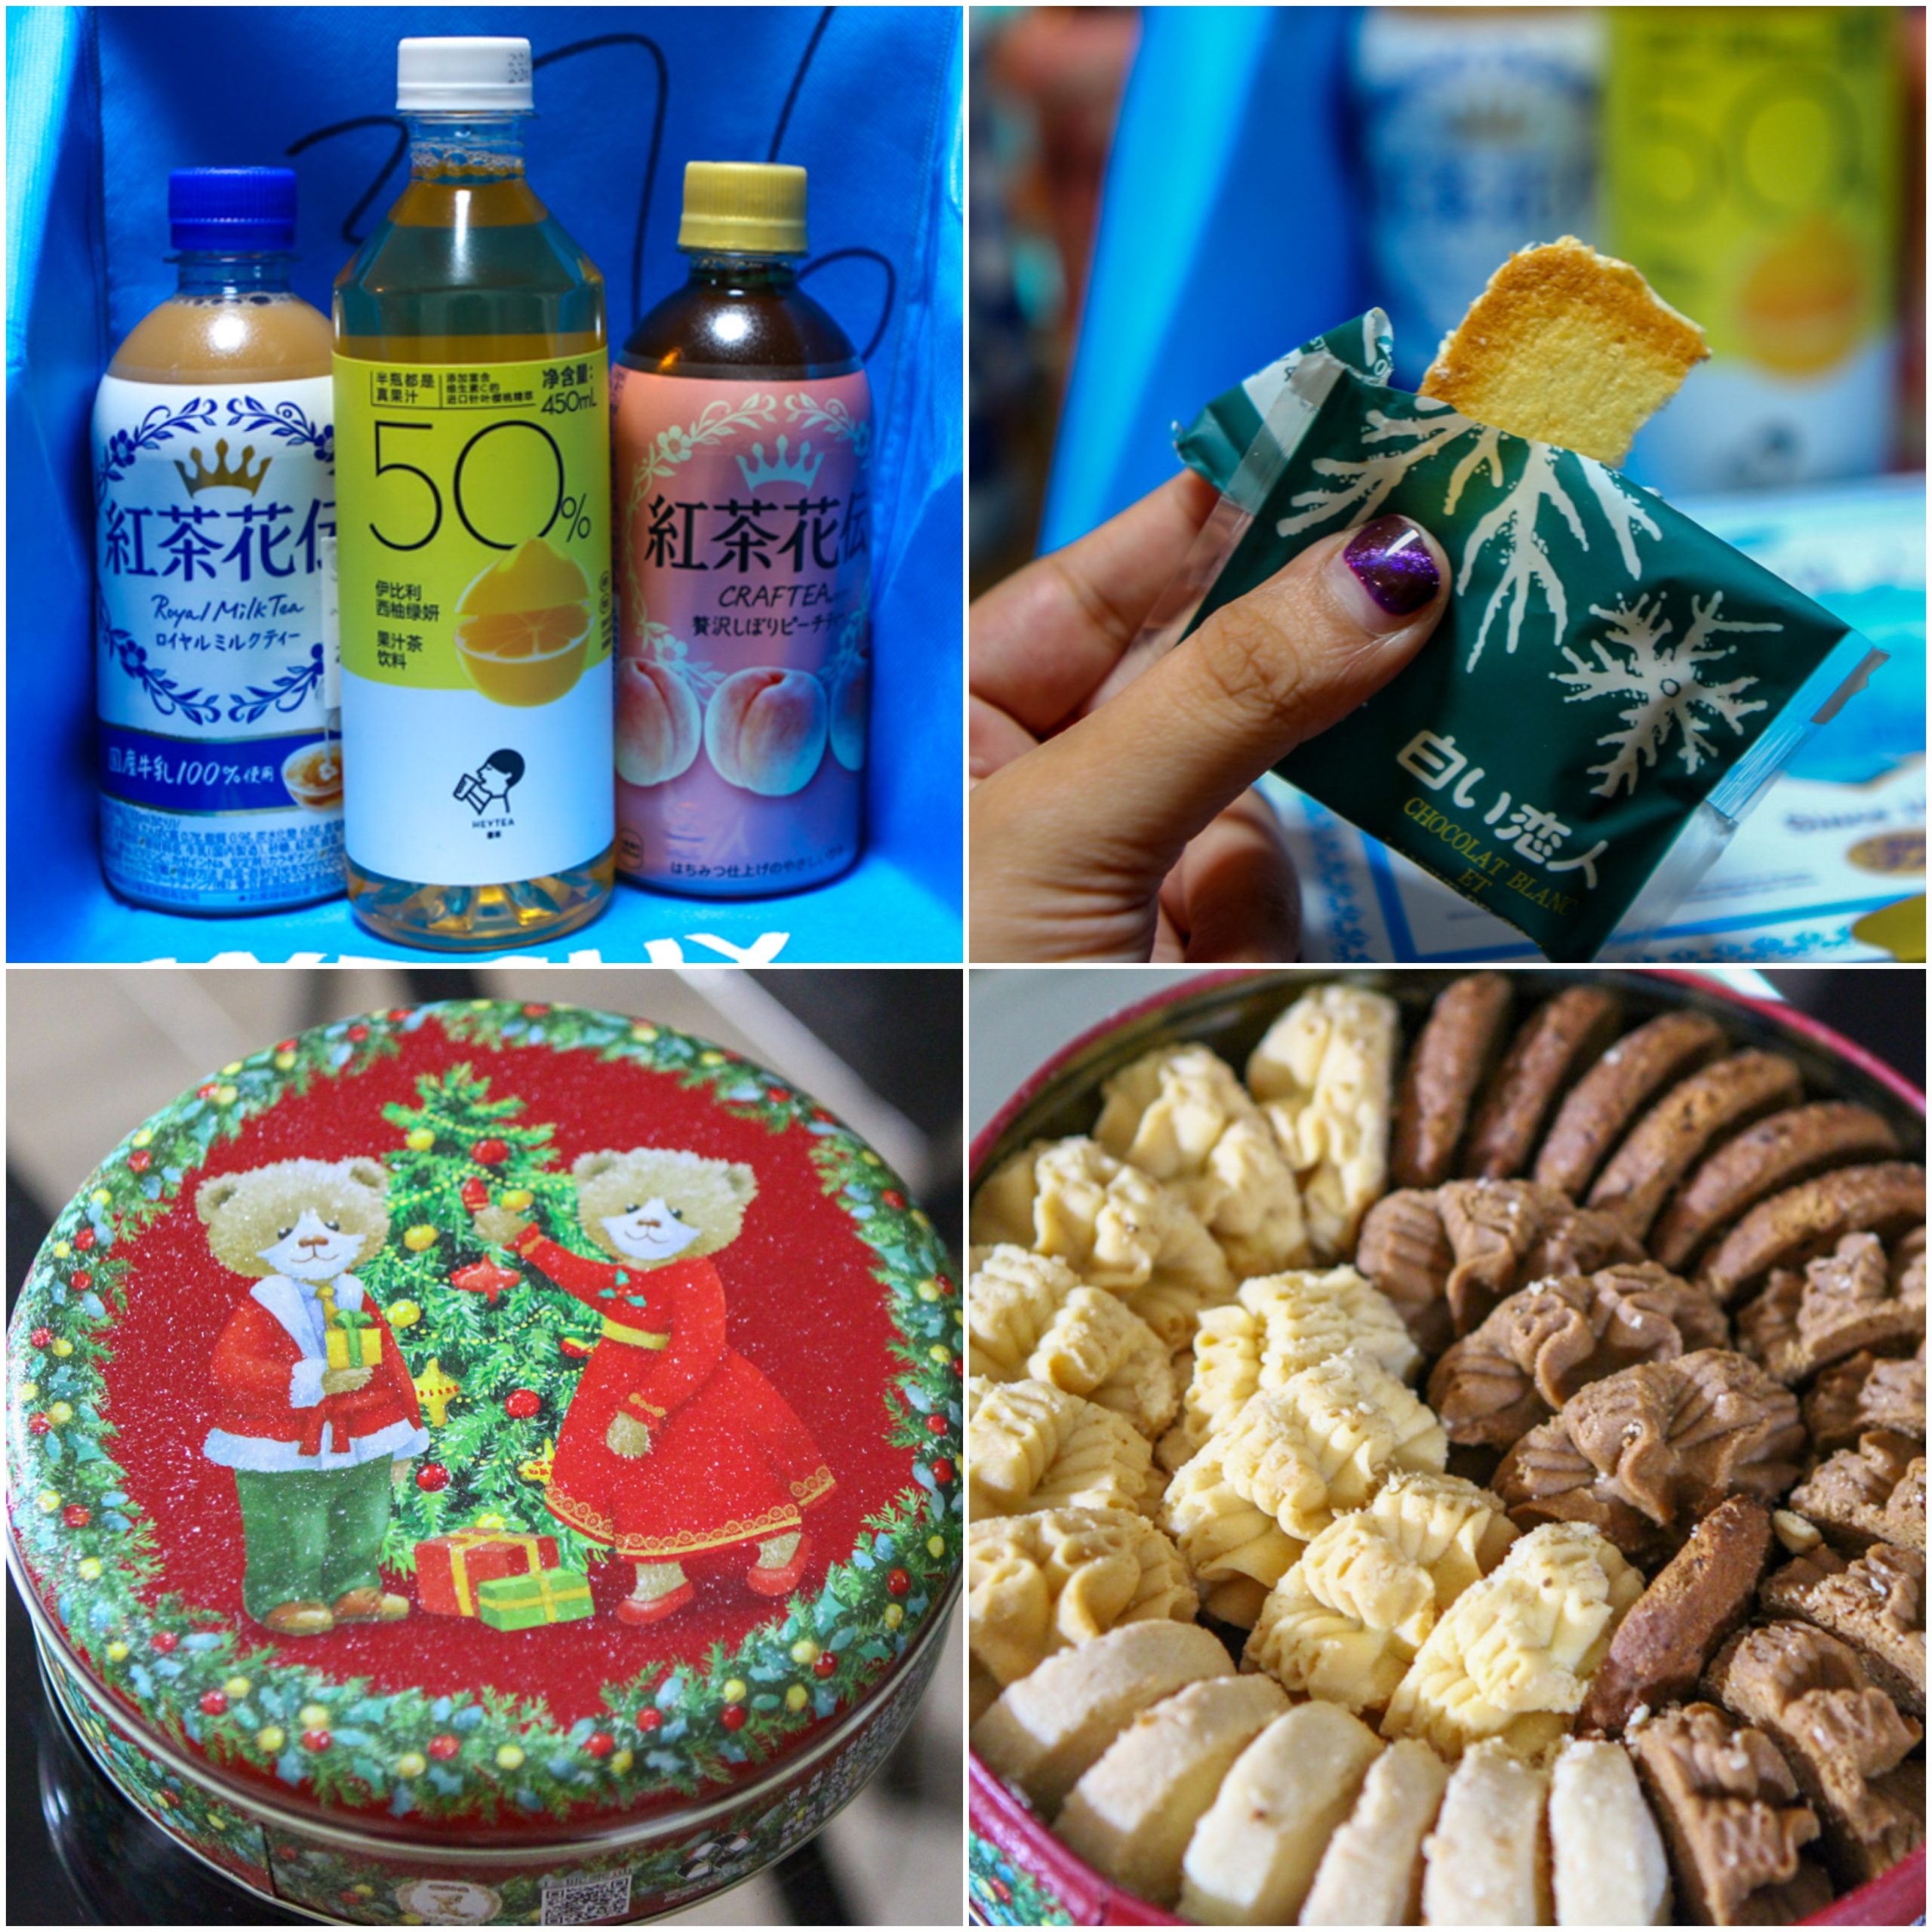 Collage Of Drinks, Japanese Chocolate And Jenny Cookies